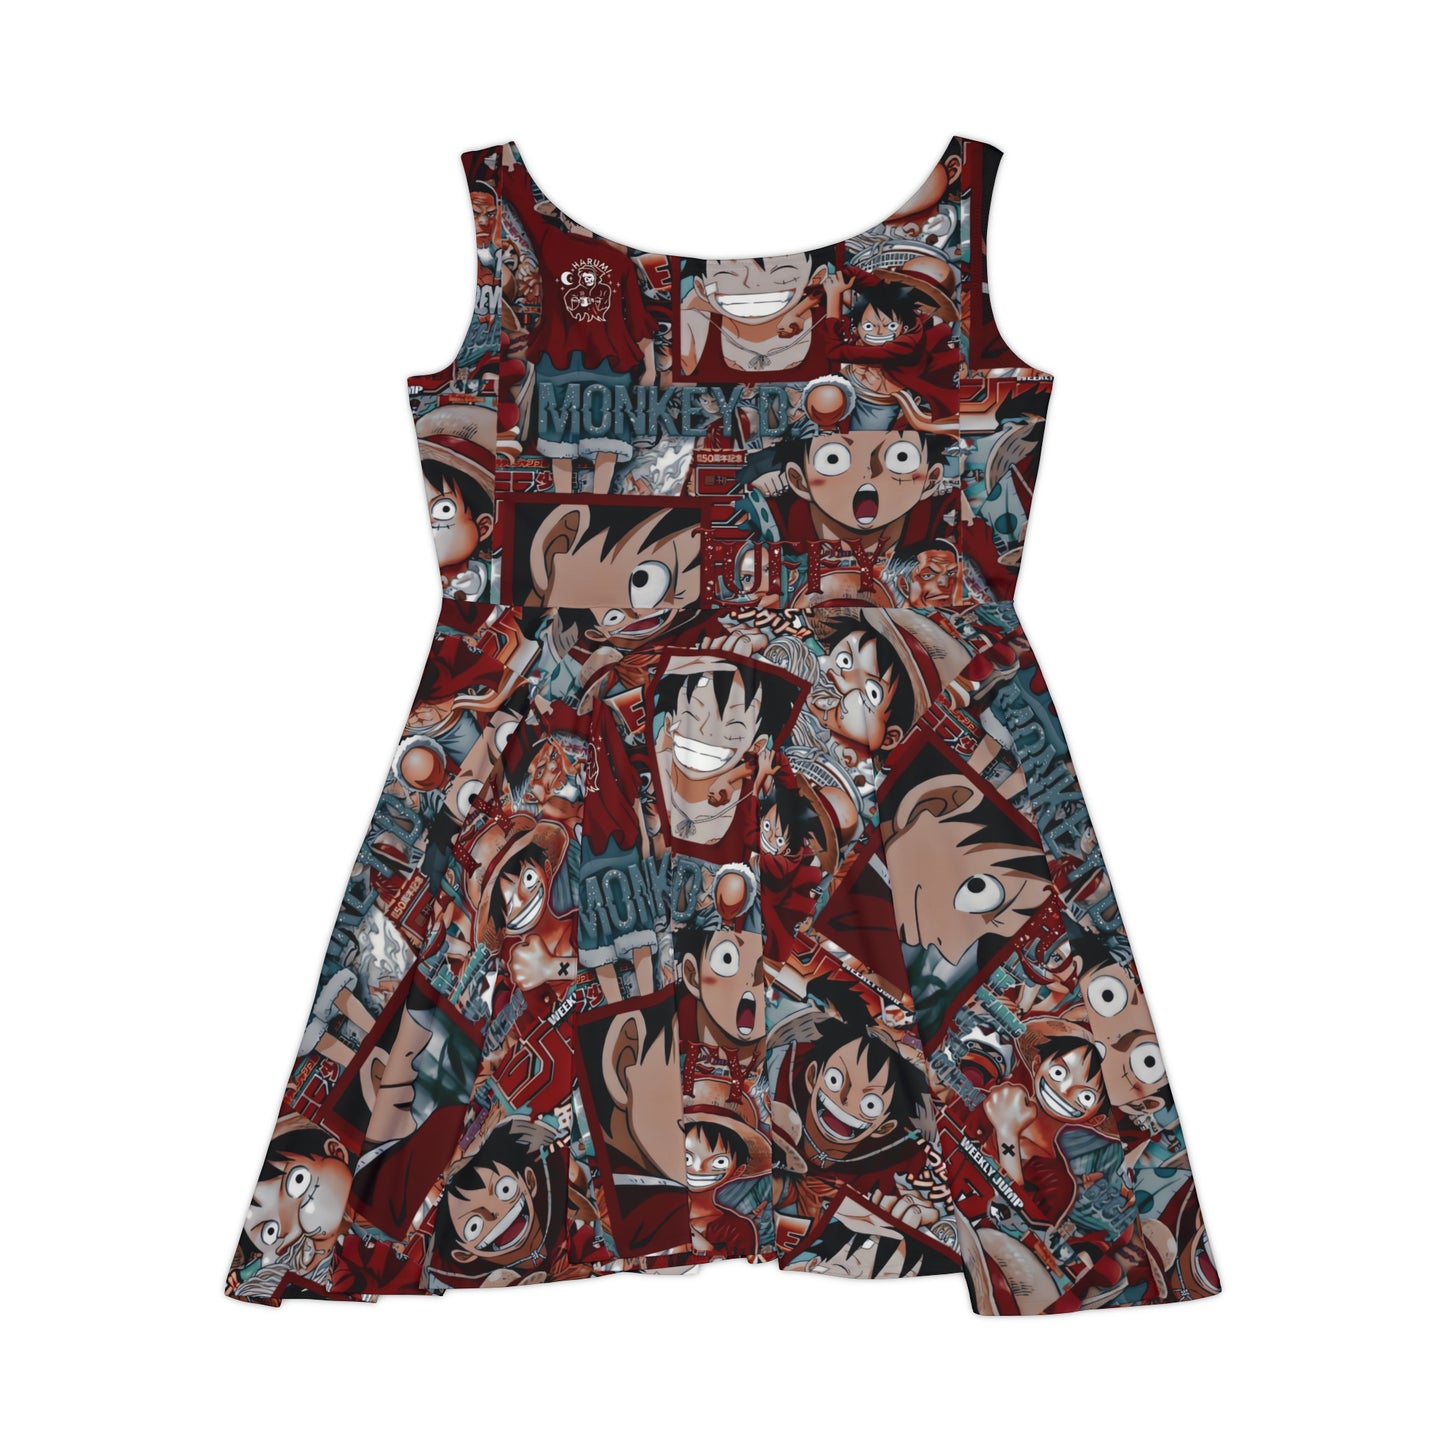 One Piece Anime Monkey D Luffy Red Collage Women's Skater Dress